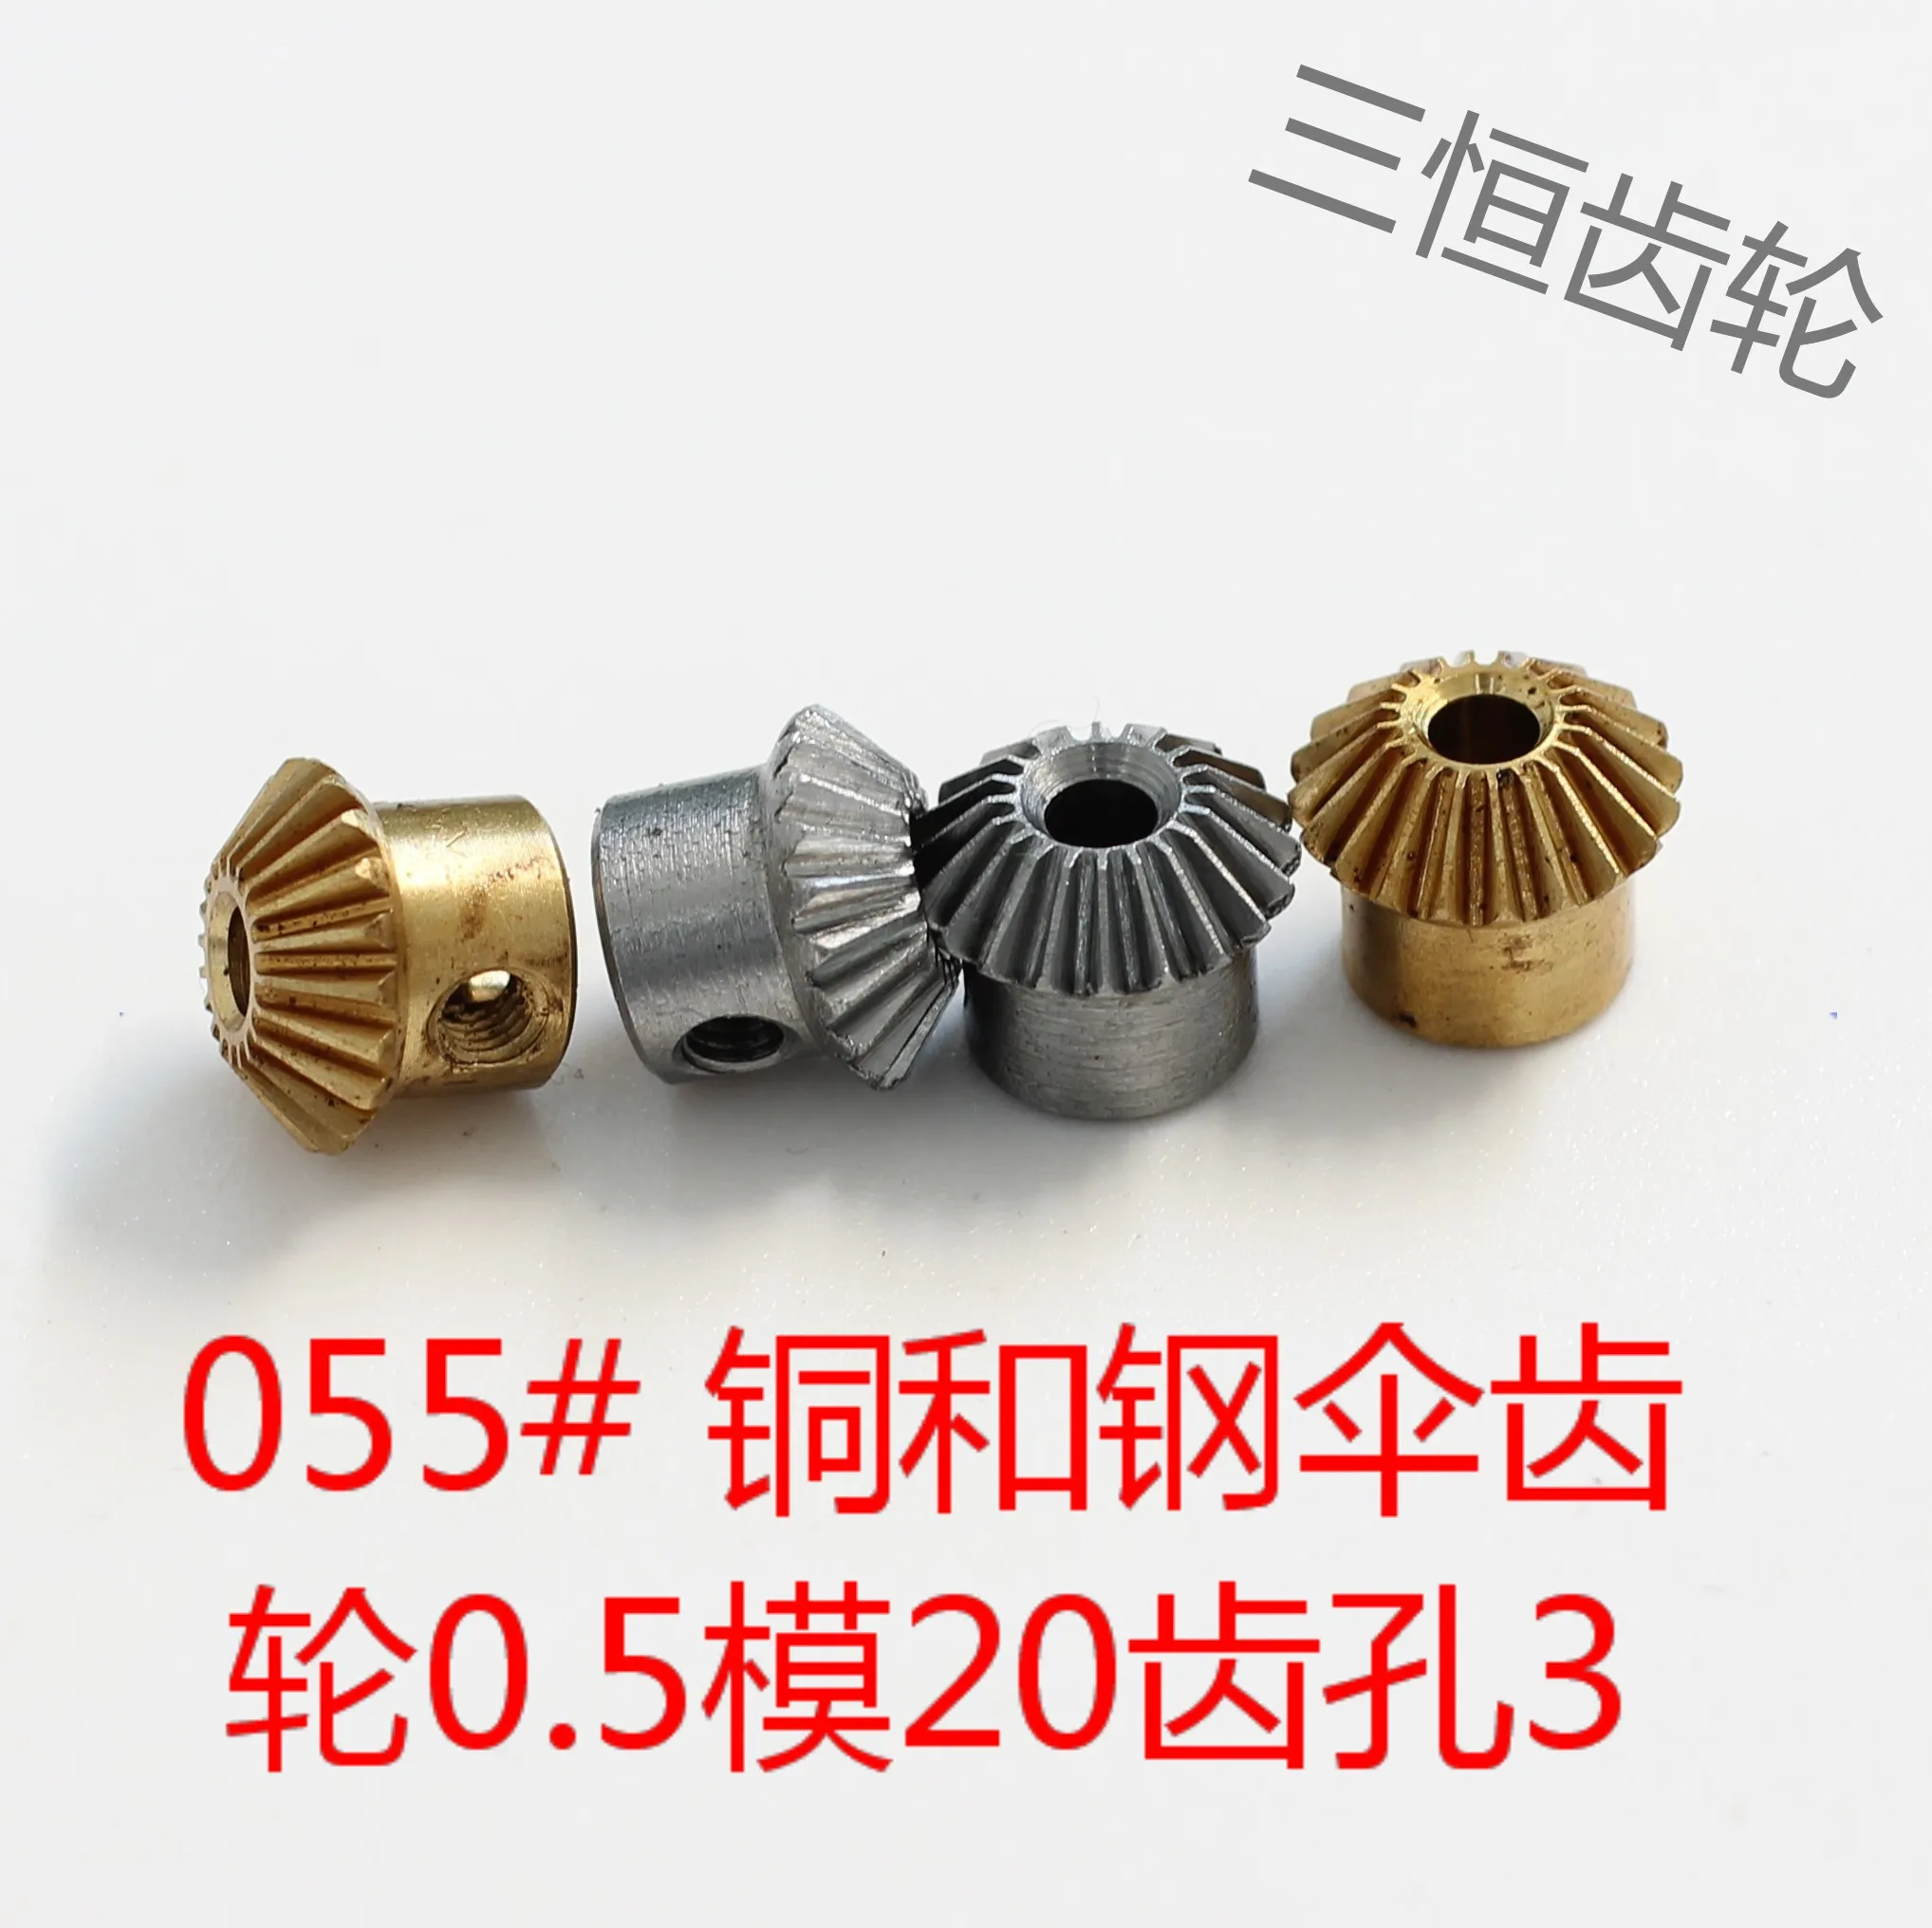 

0.5 Mold Bevel Gear Bevel Gear 20 Tooth Hole 2 Hole 3 Miniature Copper Bevel Gear 90 Degree Can Be Customized Small Modulus Gear